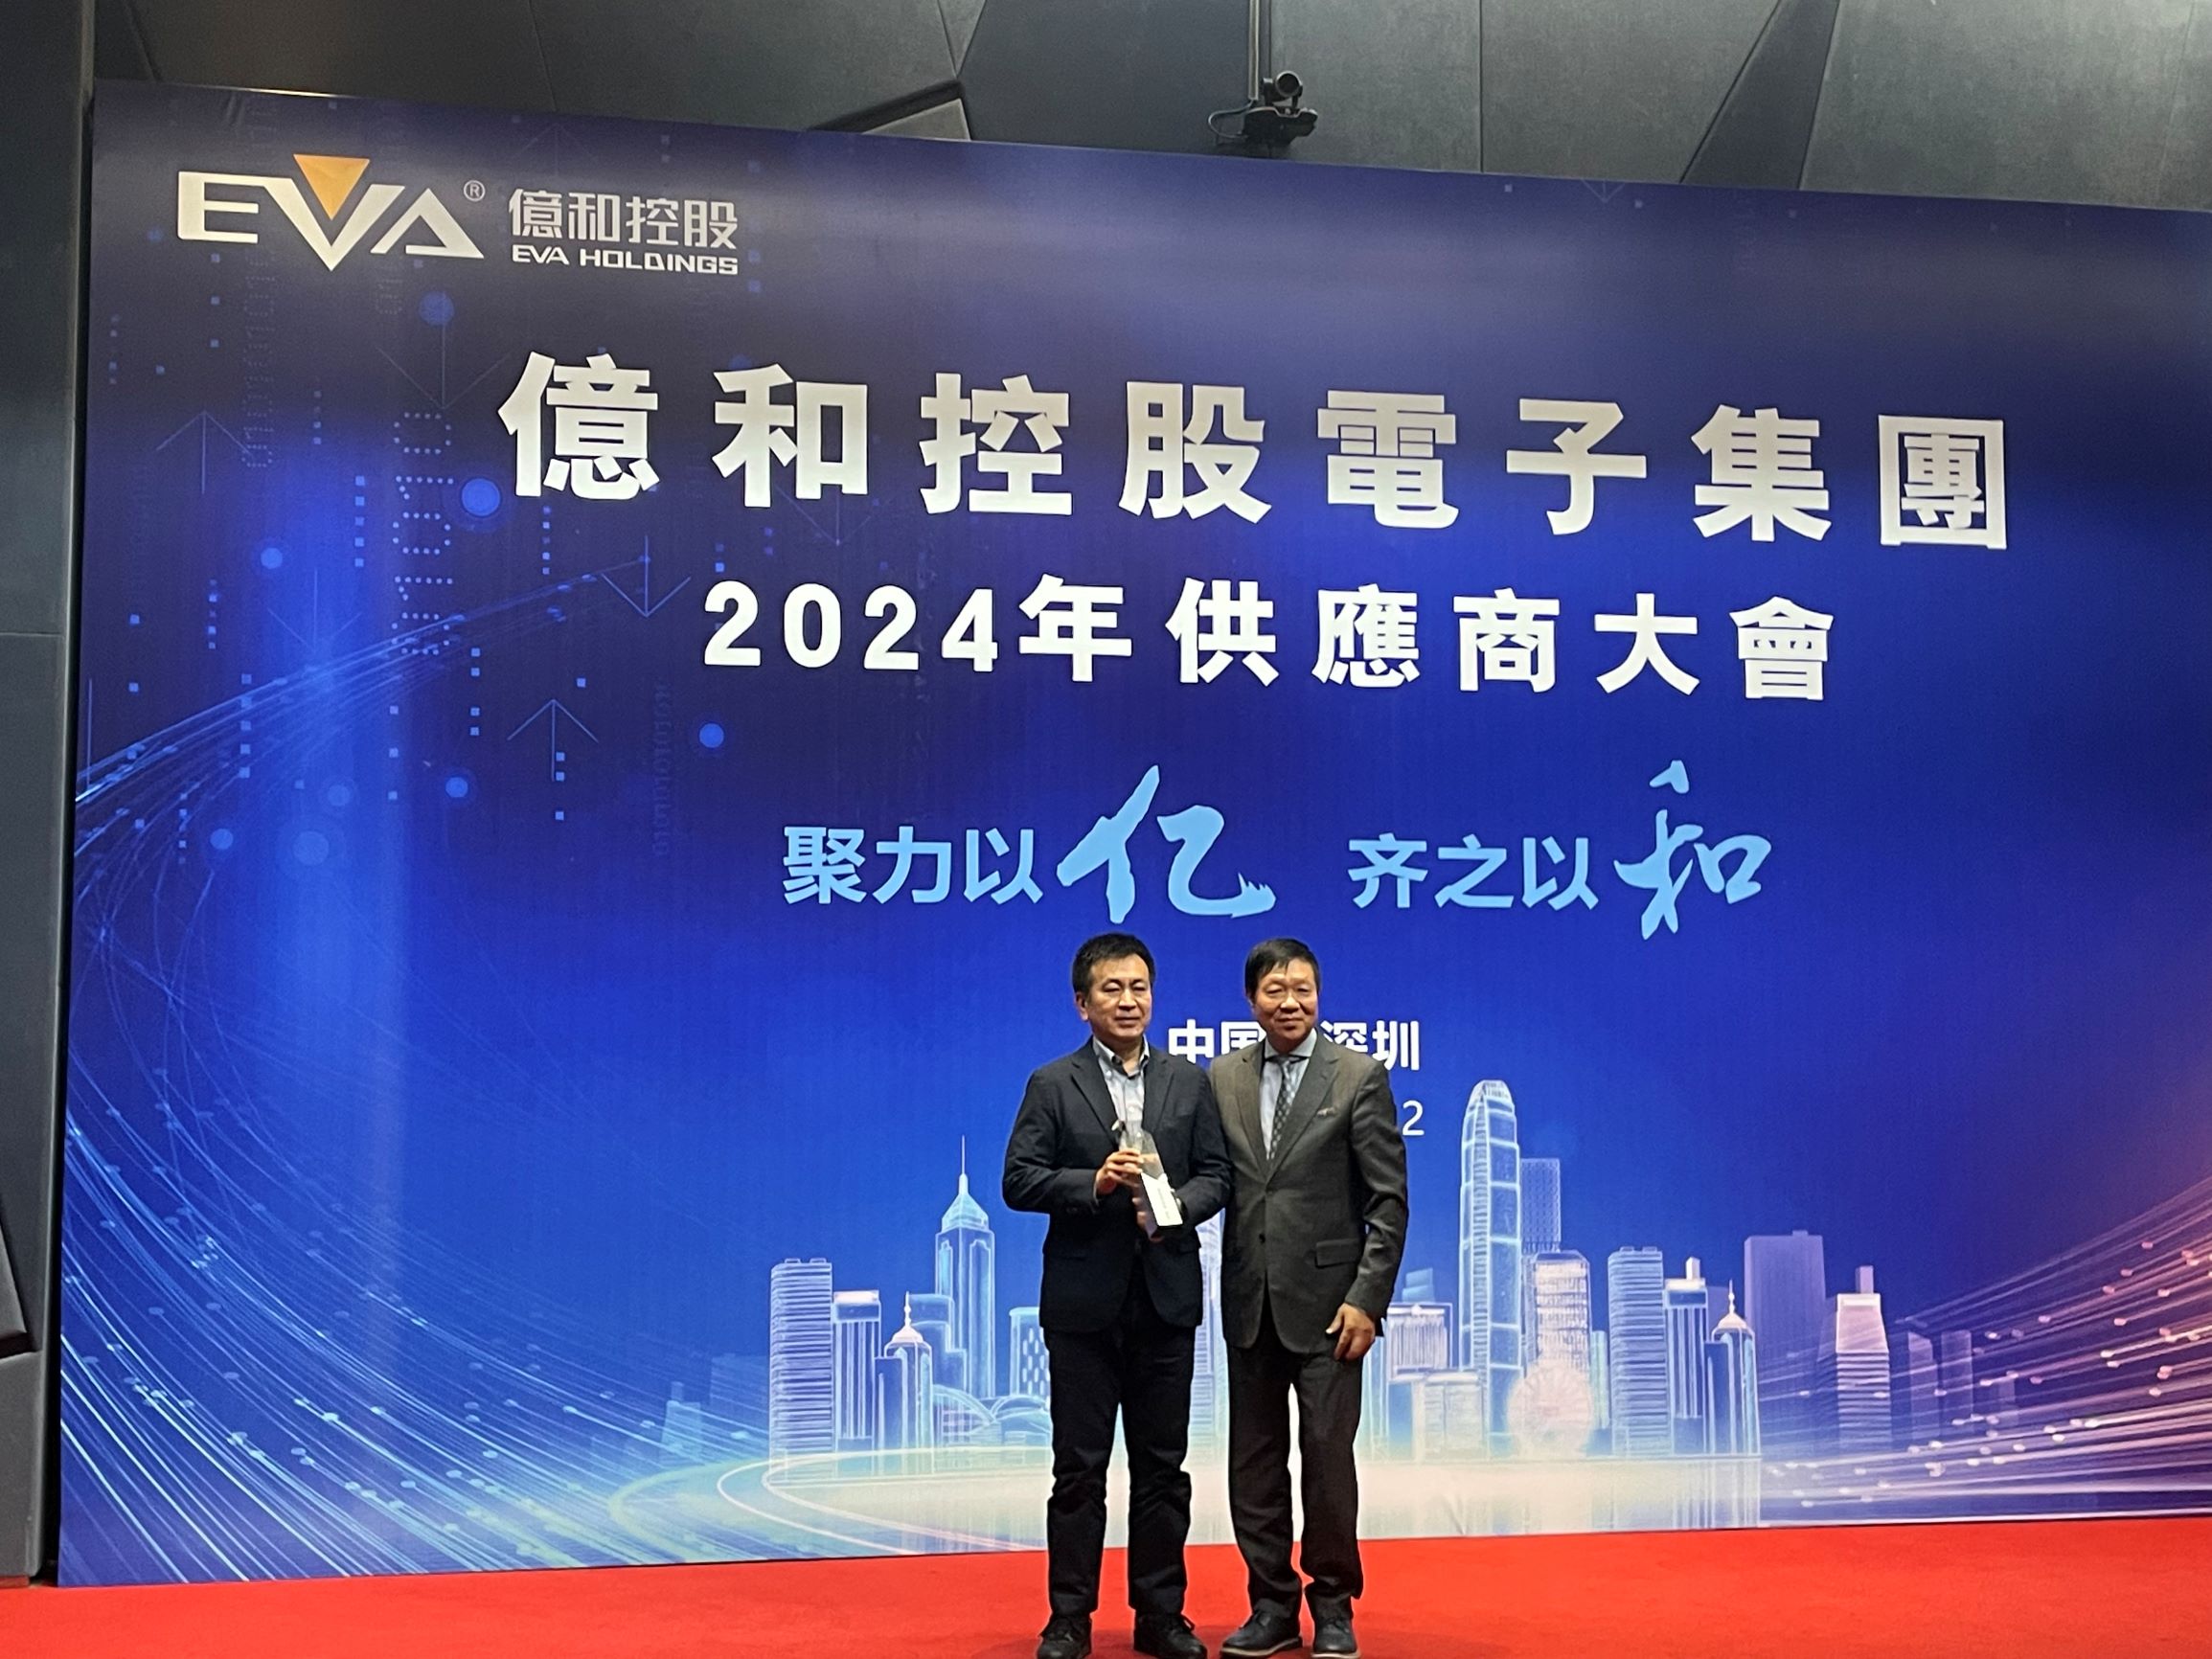 EVA Holdings Electronic Business Group Gives Gold Supplier Award to Dongguan JFE